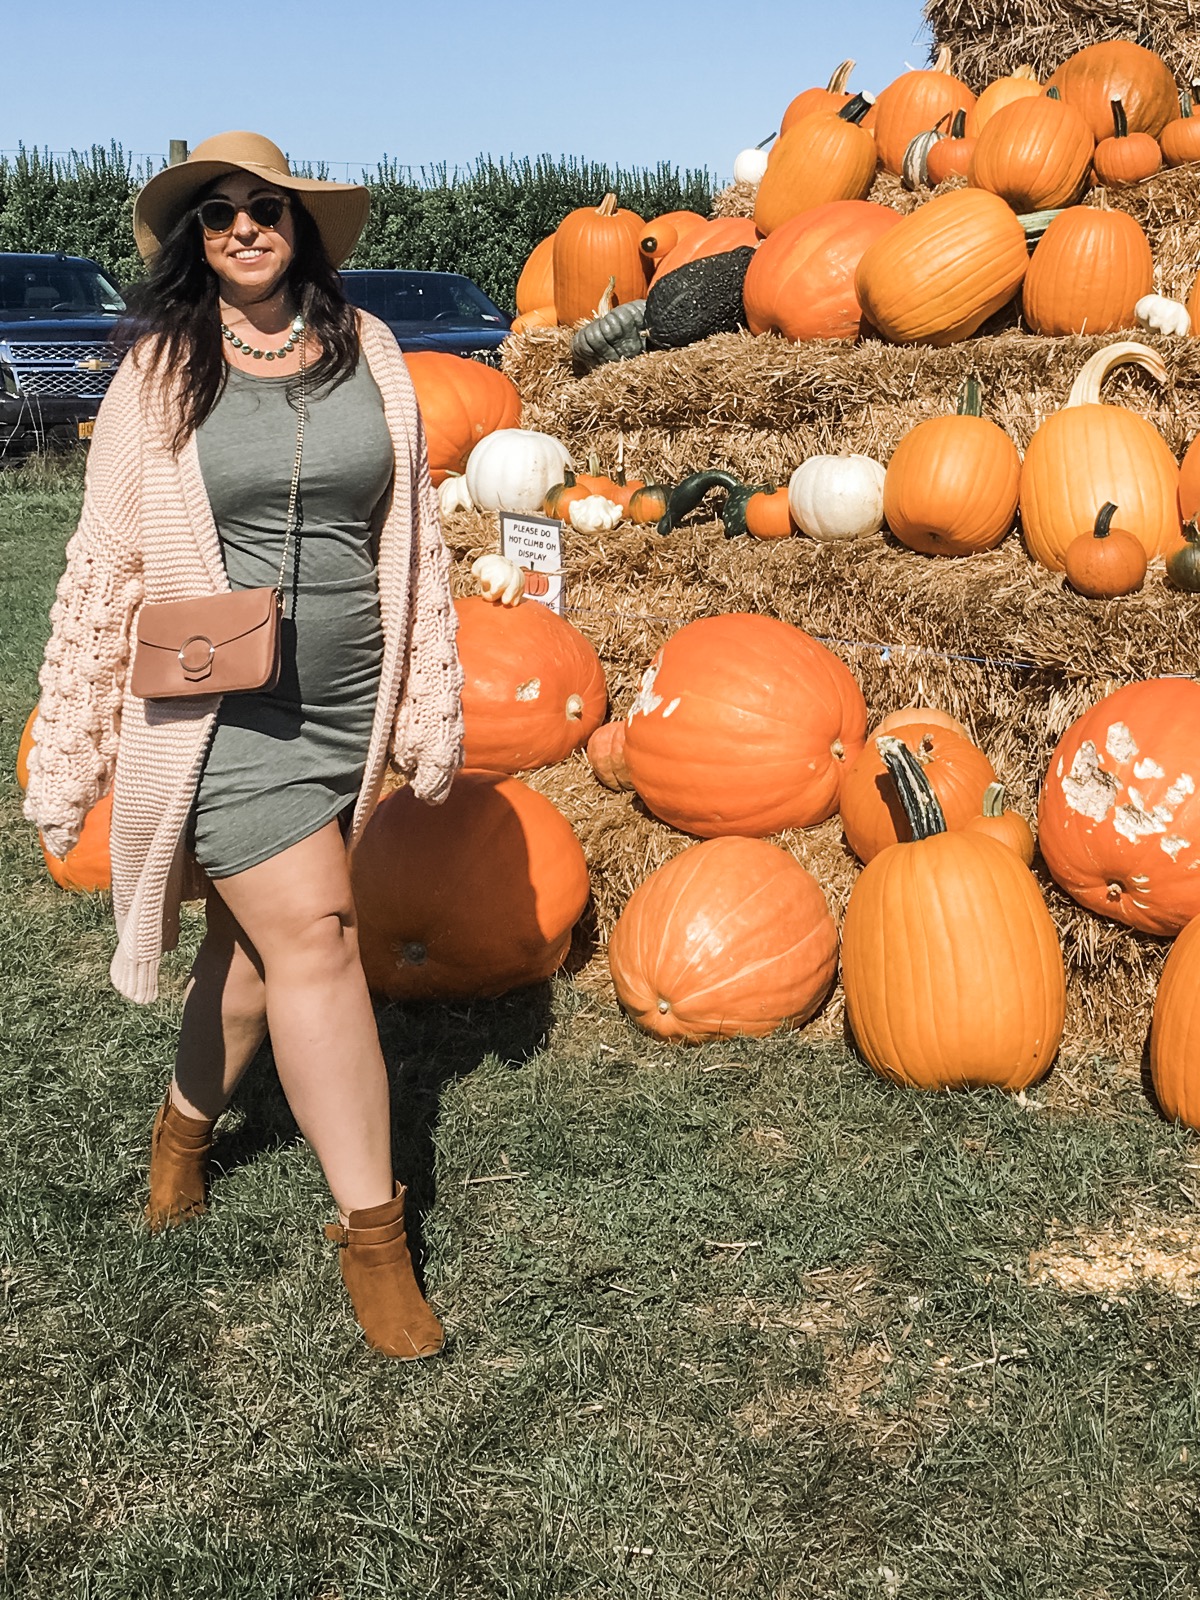 OOTD: 5 Perfect Pumpkin or Apple picking outfits :: Effortlessly with Roxy